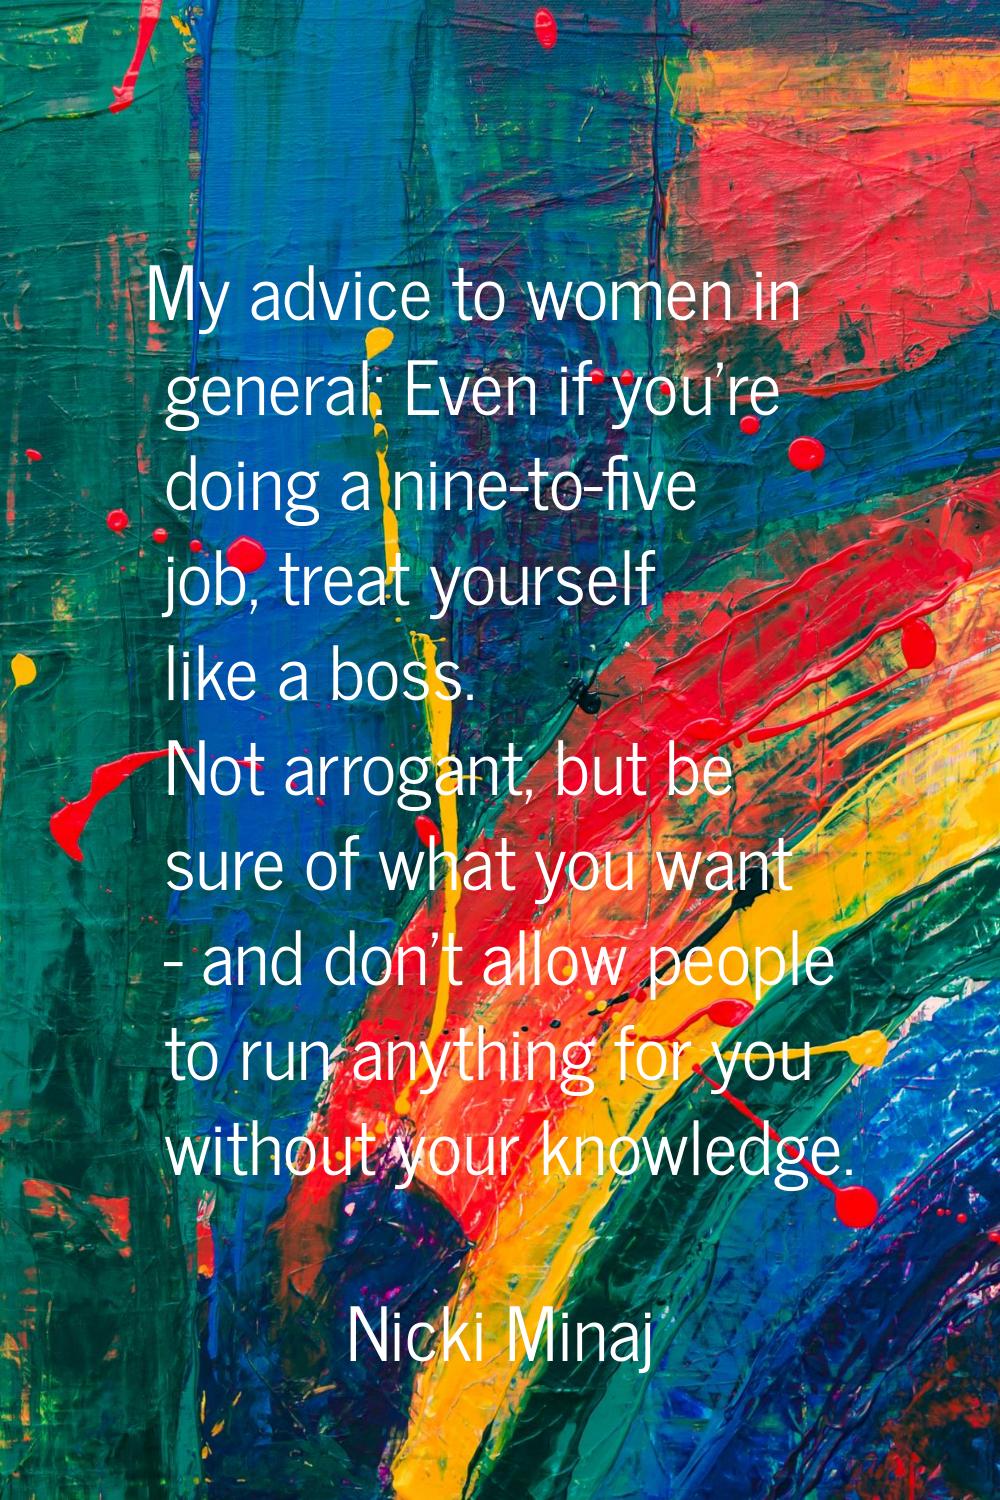 My advice to women in general: Even if you're doing a nine-to-five job, treat yourself like a boss.